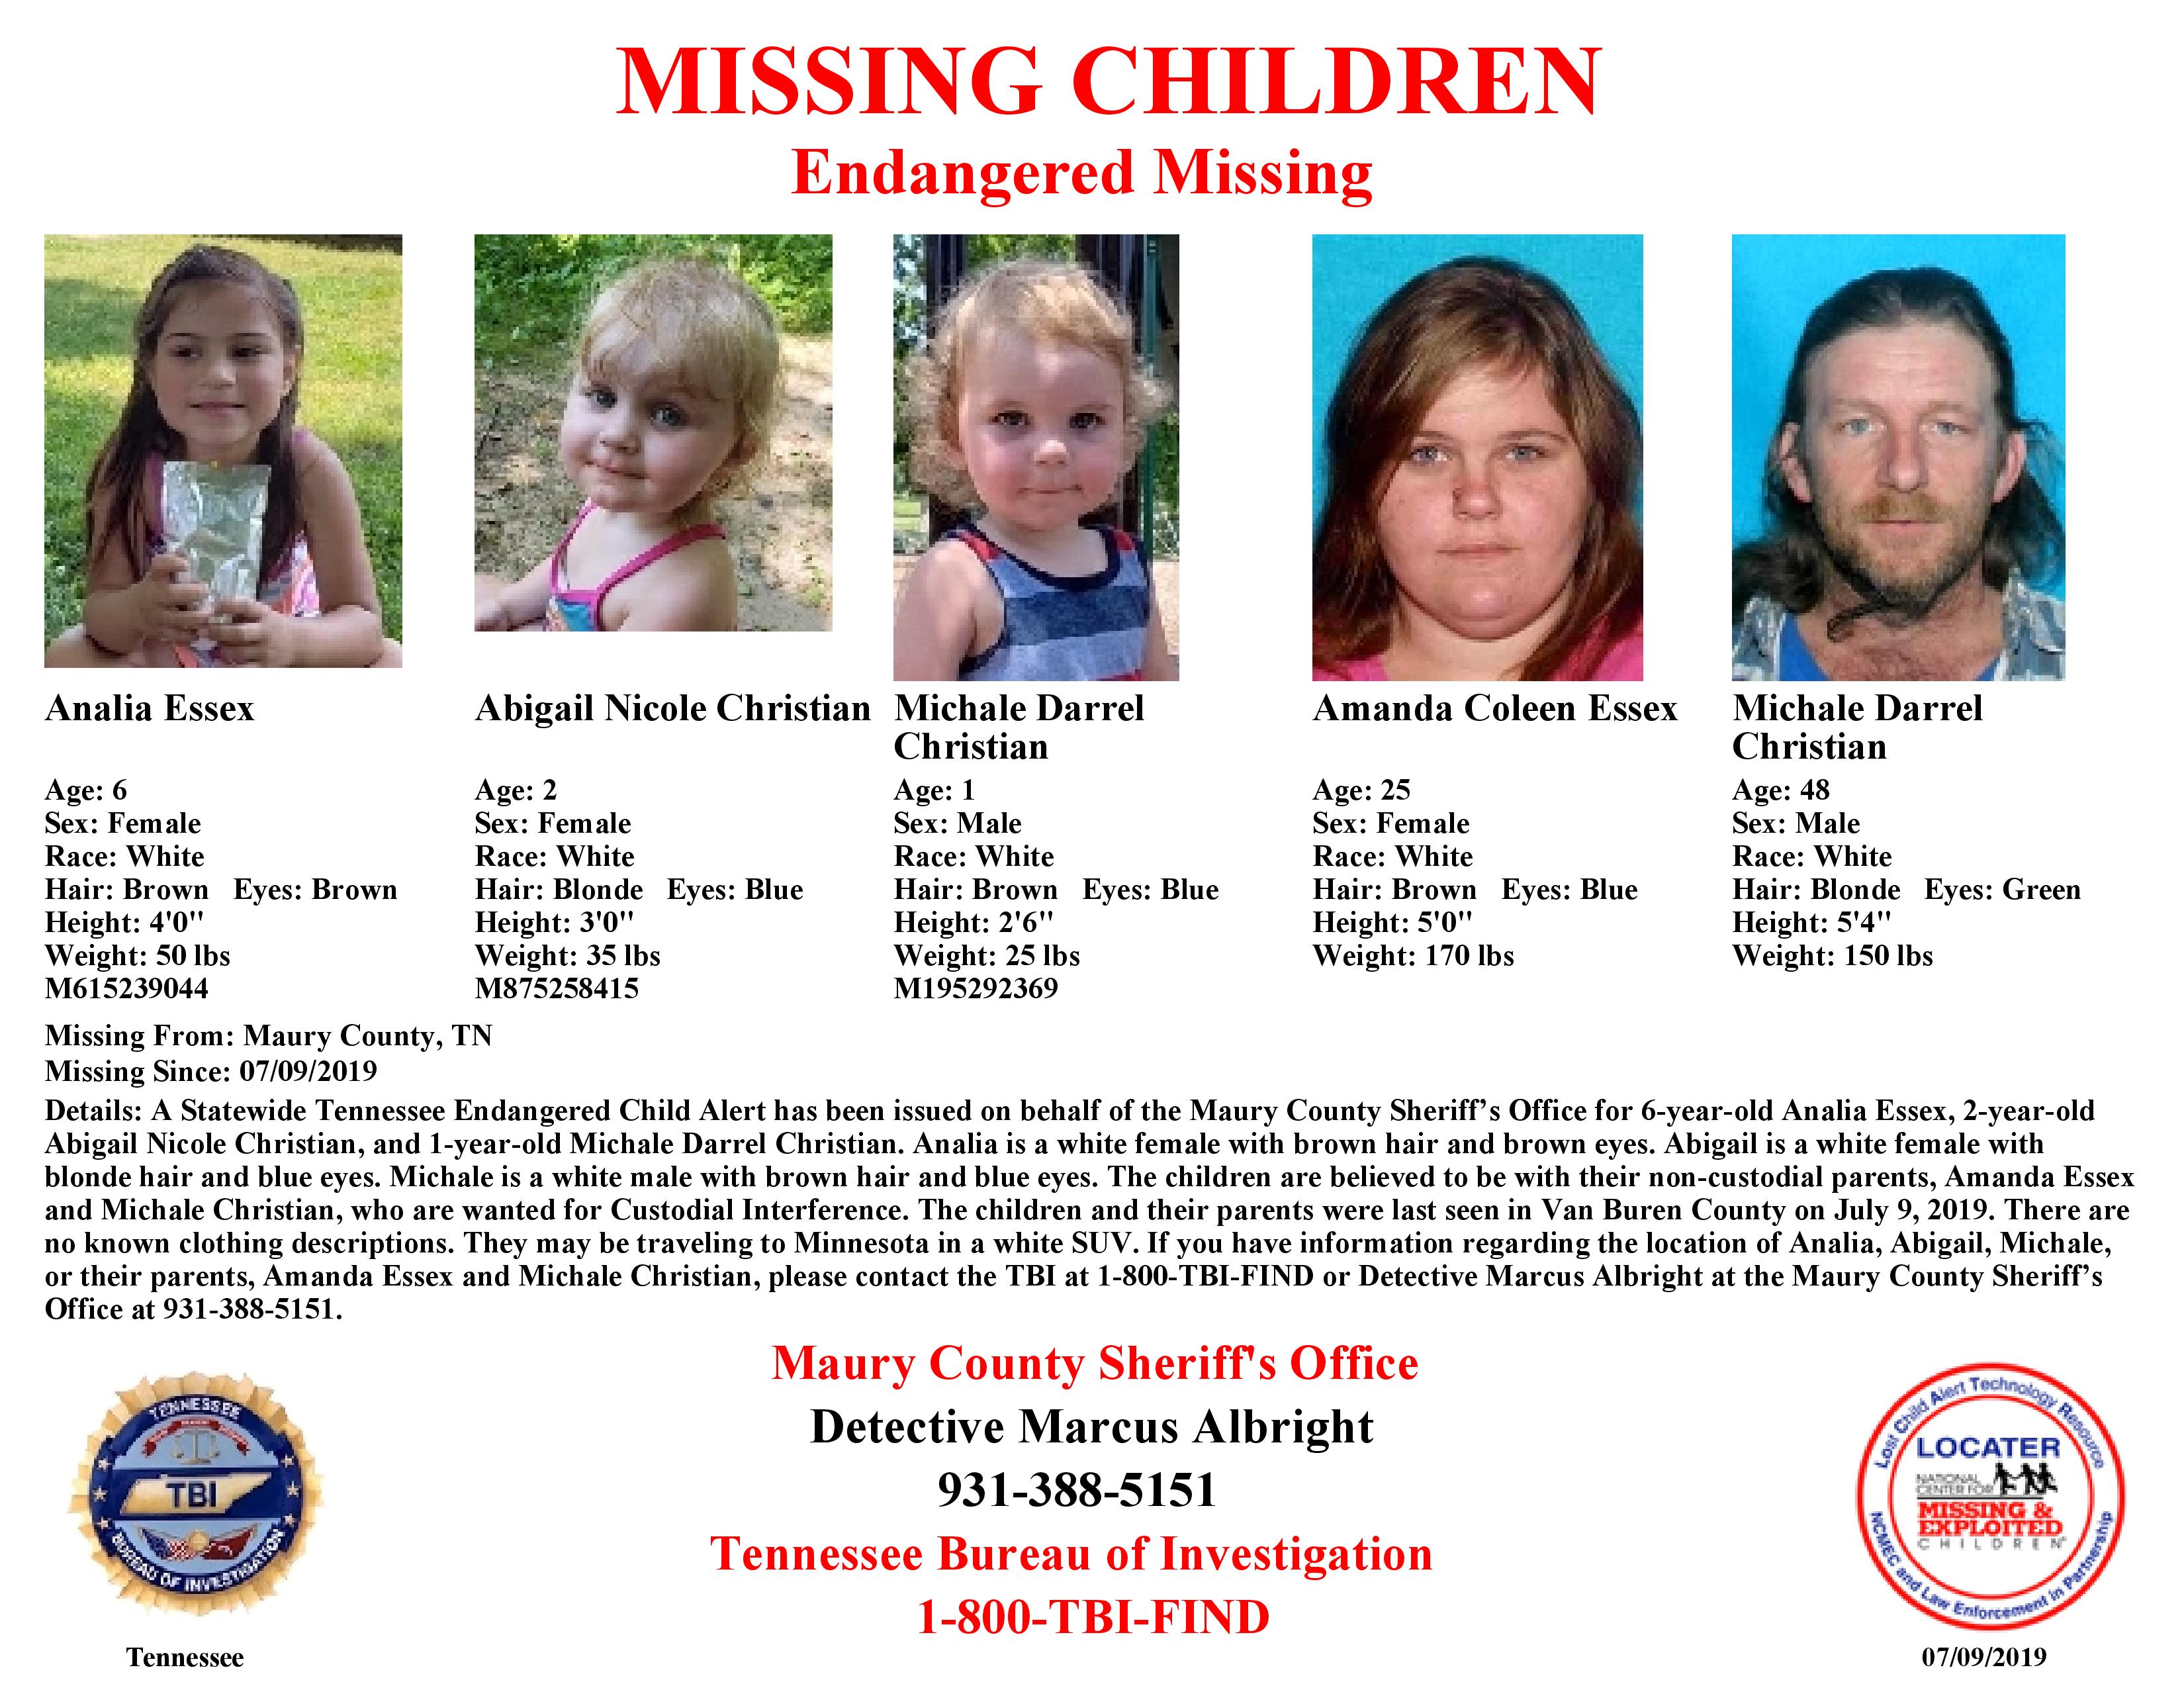 Tennessee Authorities searching for 3 missing children